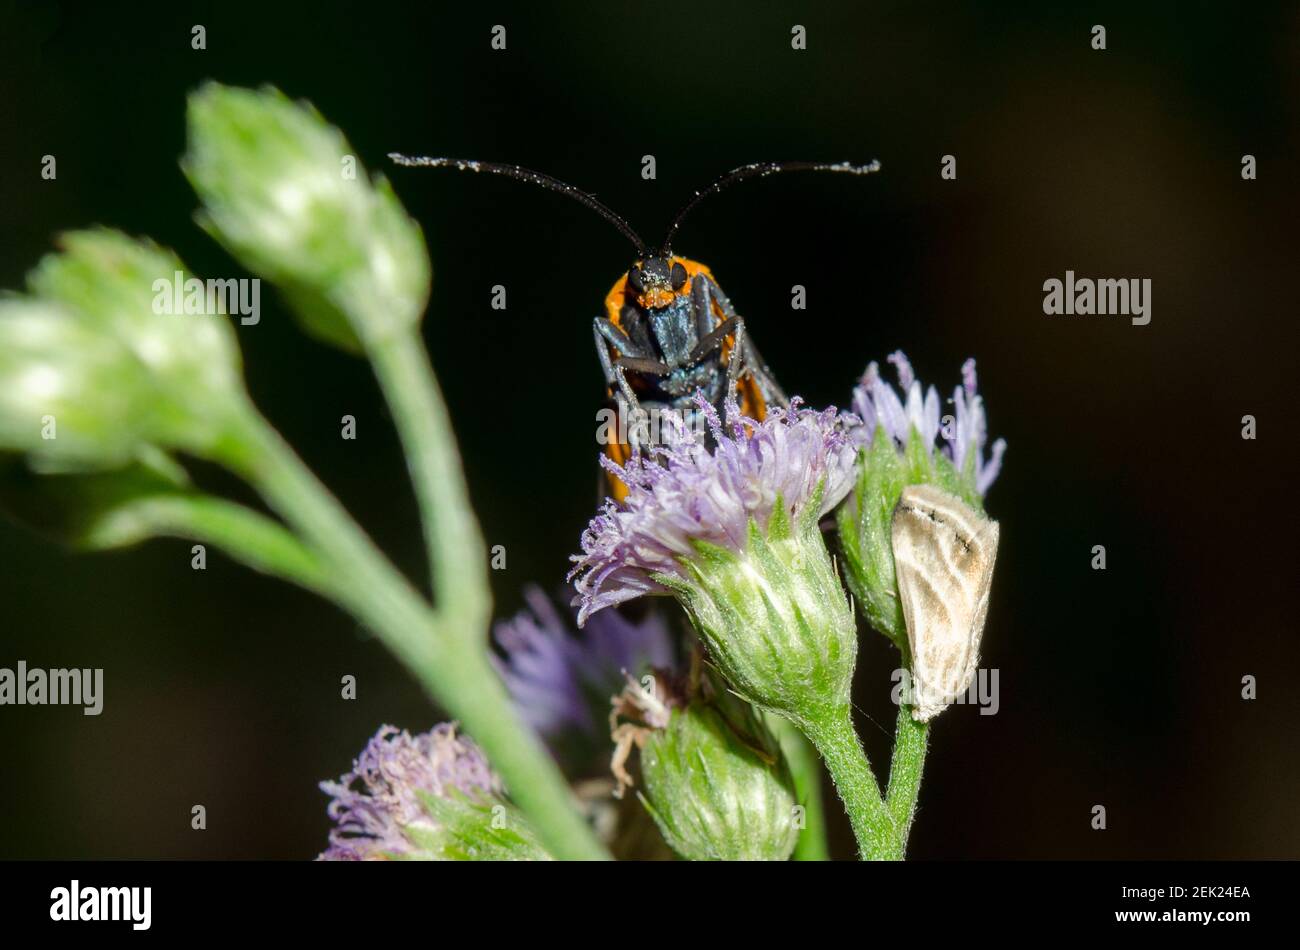 Forester Moth, Artona walkeri, with camouflaged moths, Eublemma sp, on Goatweed flower, Ageratum conyzoides, Klungkung, Bali, Indonesia Stock Photo